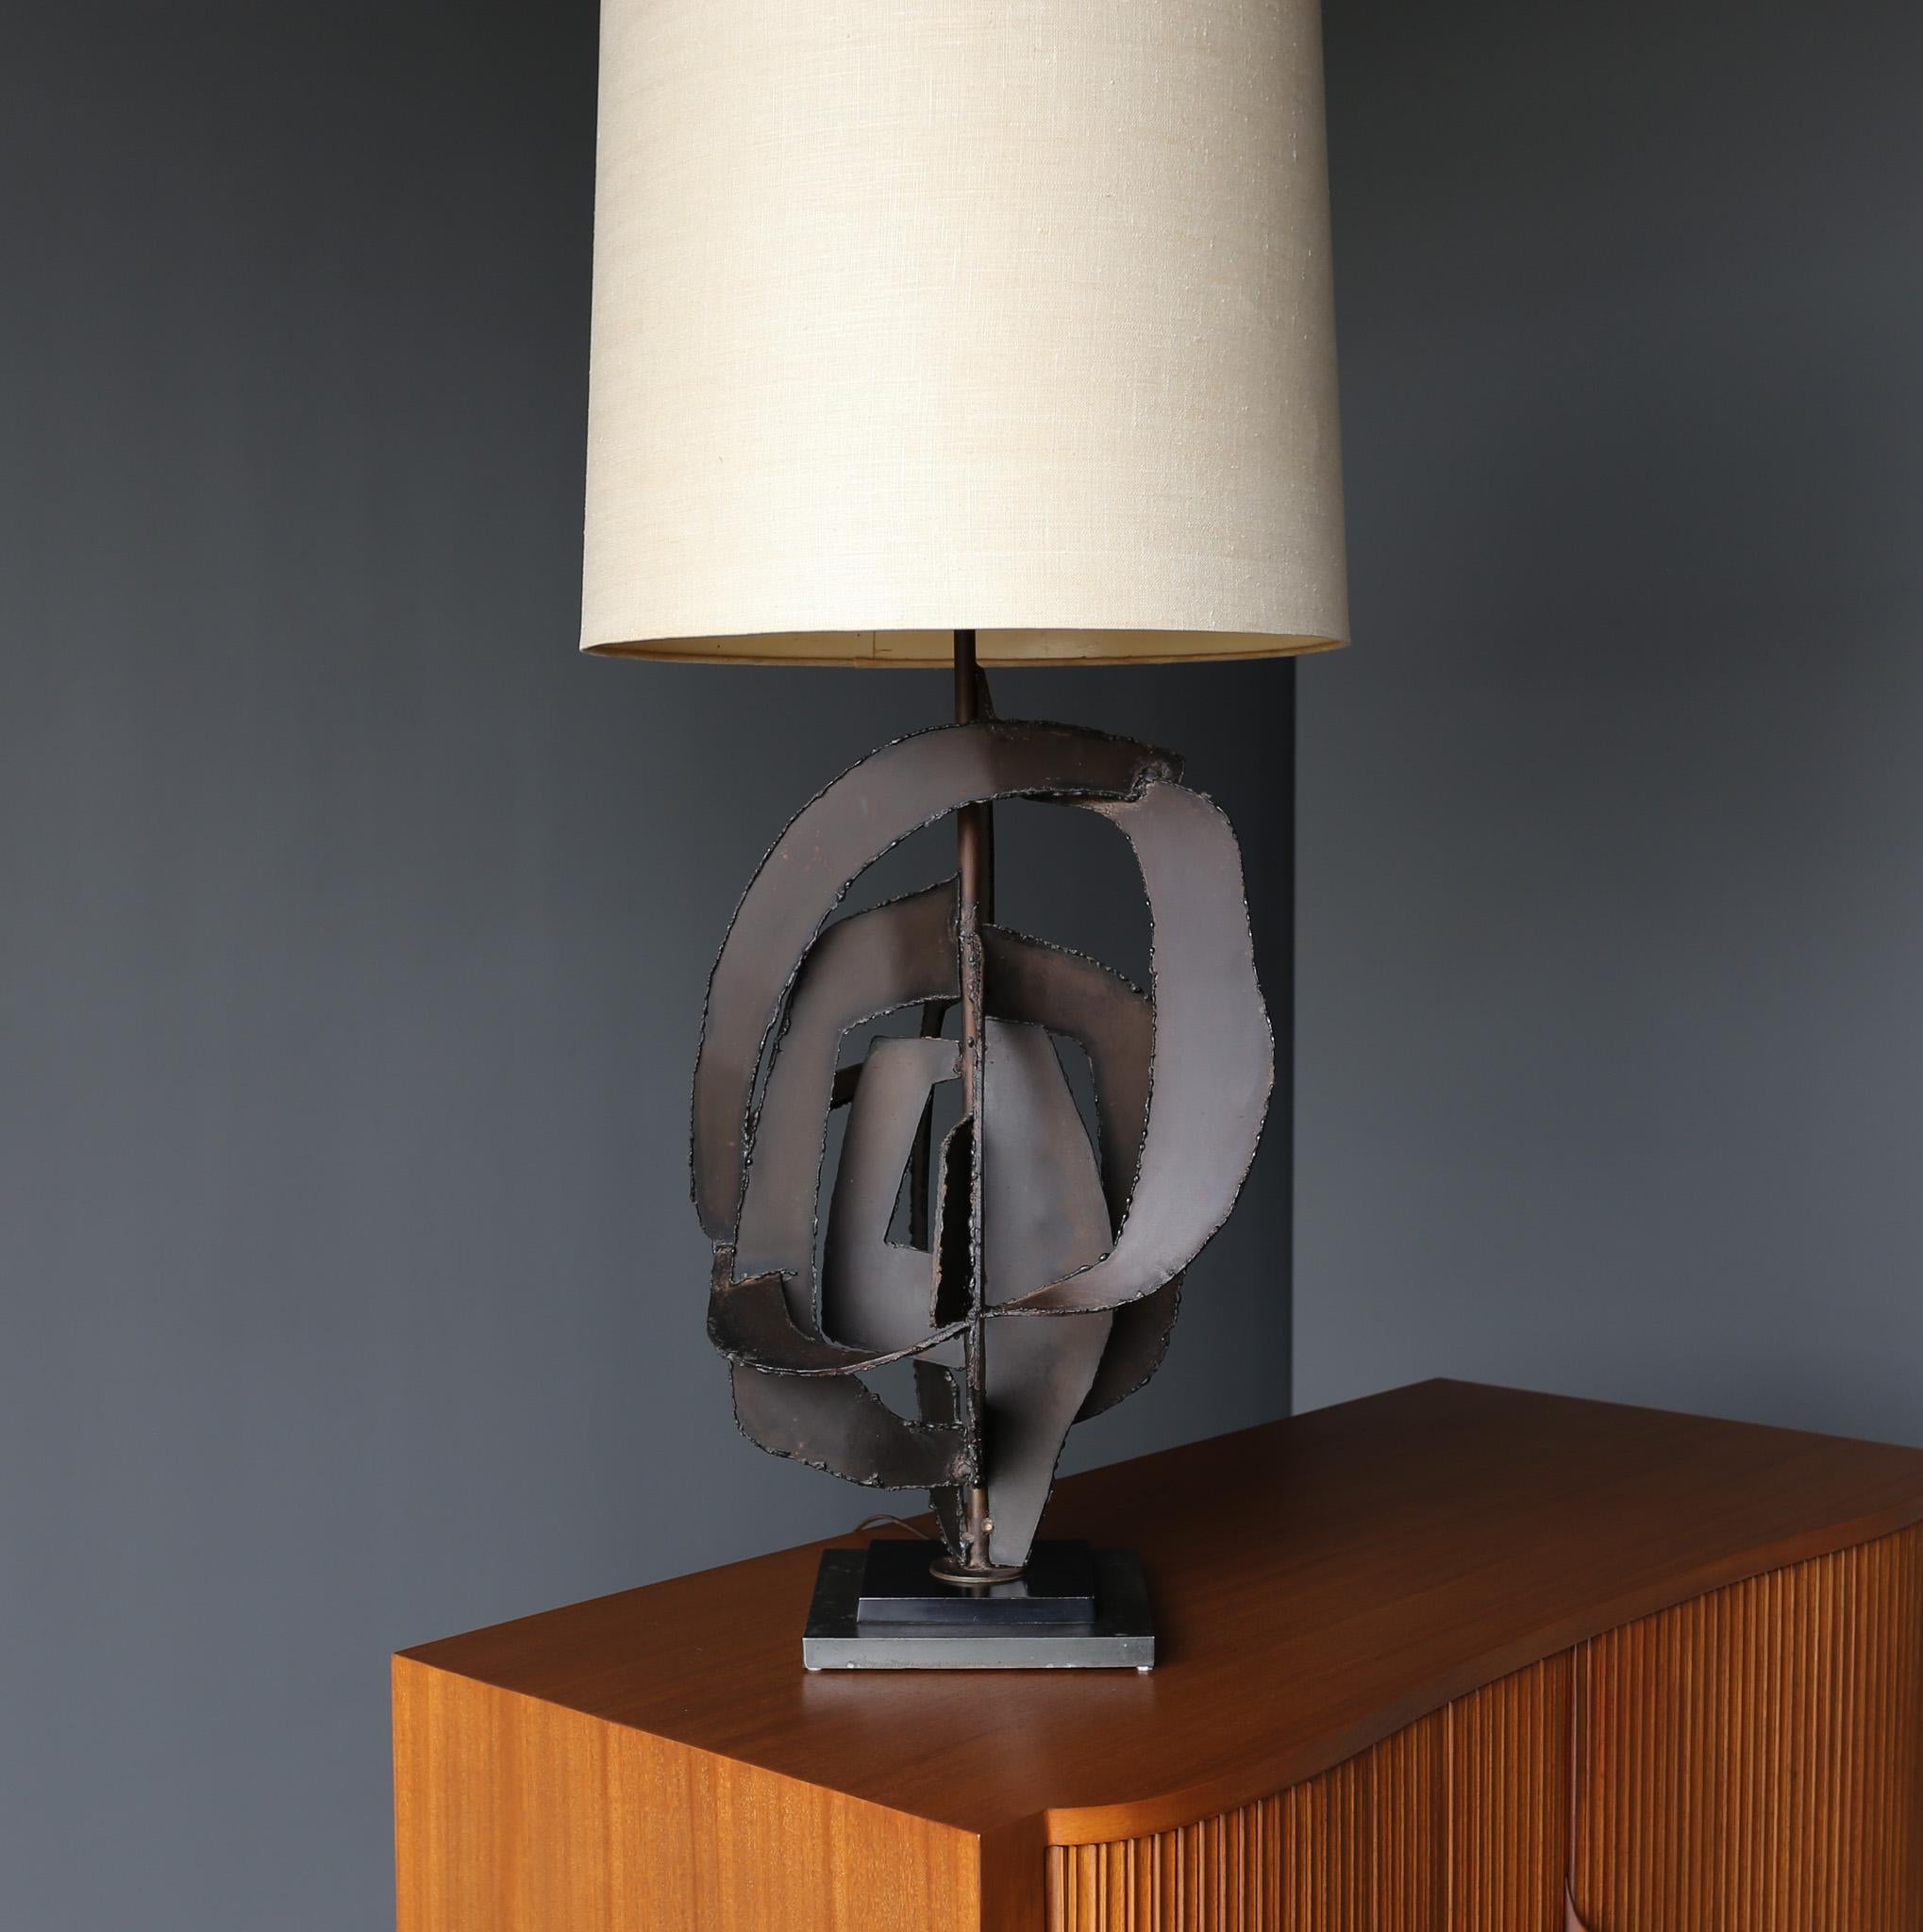 Richard Barr Sculptural Table Lamp for the STUDIO Collection by Laurel, United States, c.1965.  Beautiful torch cut and welded brutalist form. 

Measures: 

- 13